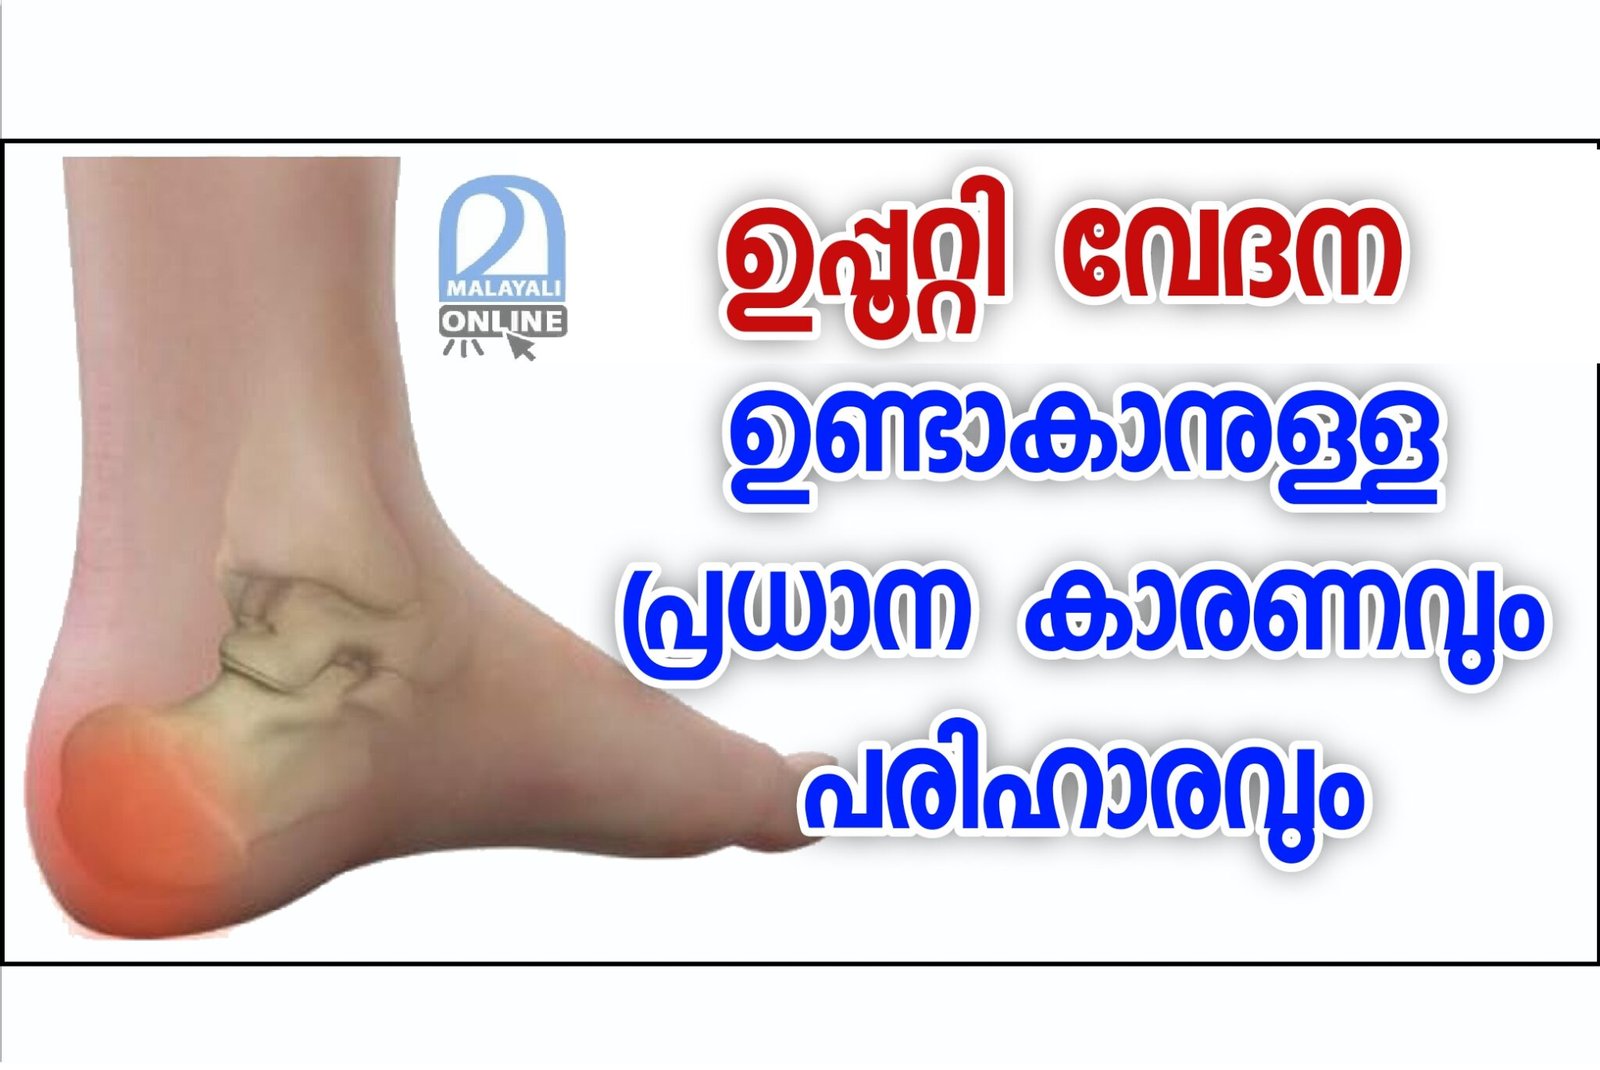 Causes and management of heel pain - Malayali Online